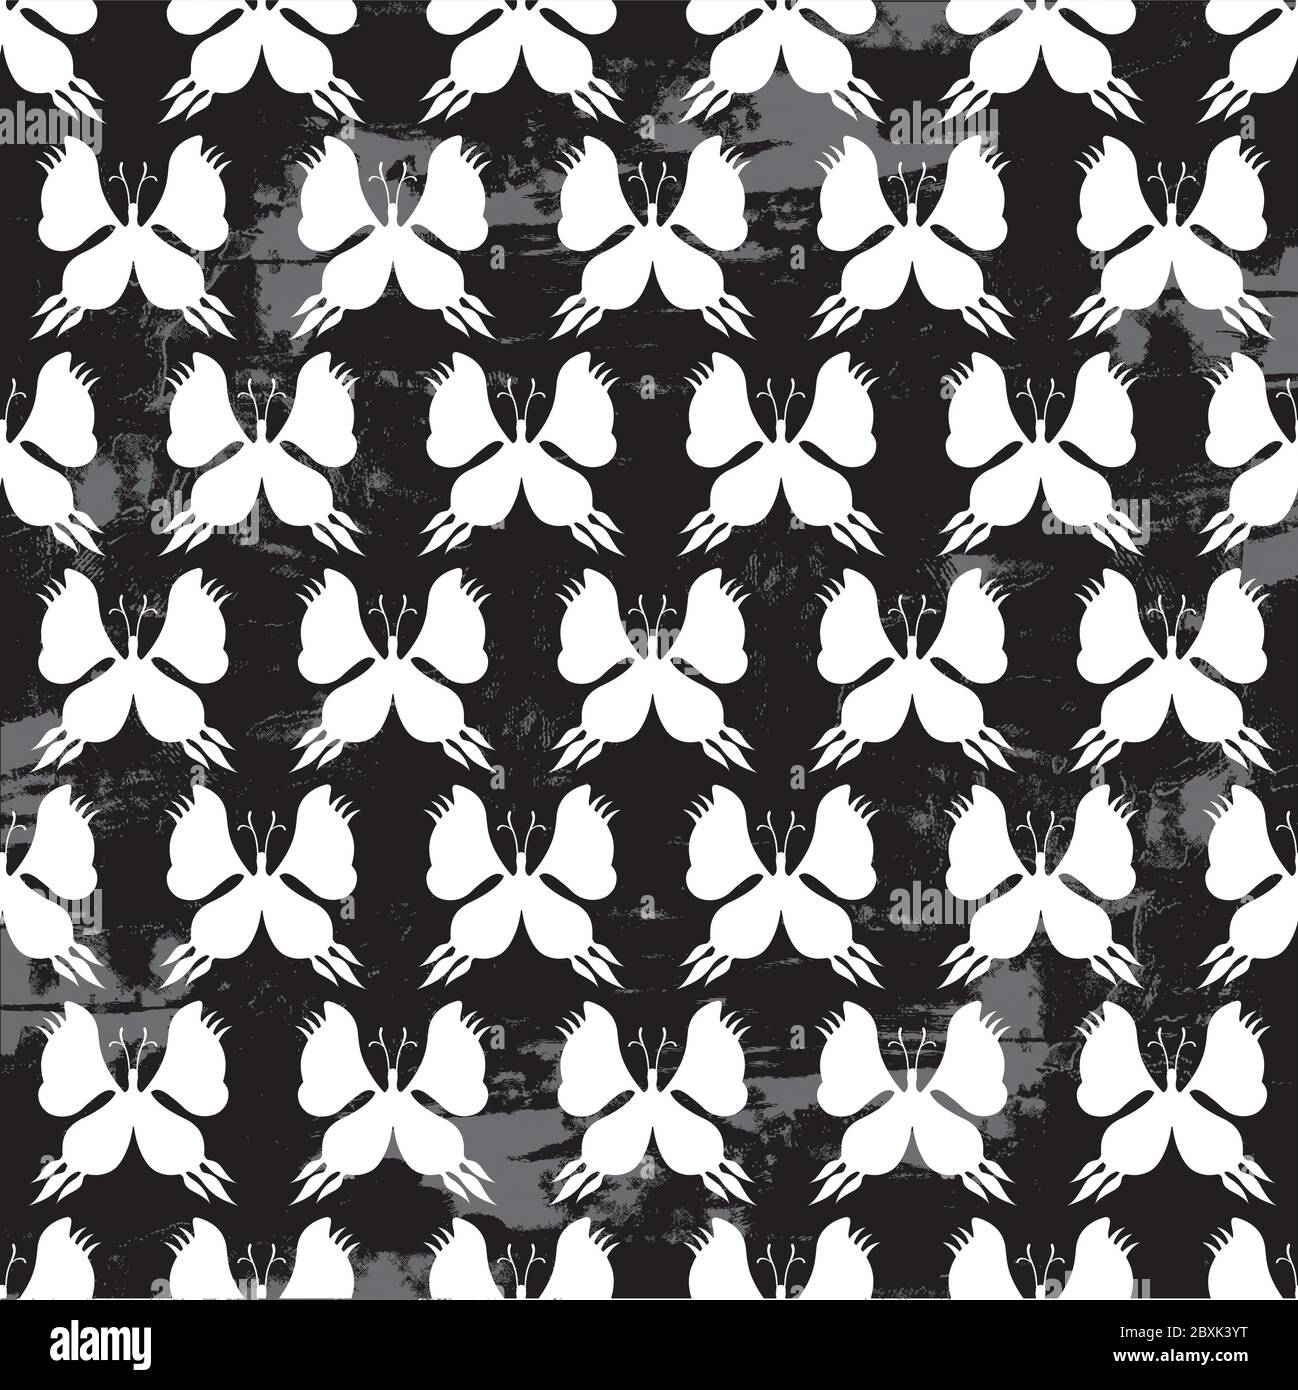 Butterfly Seamless Pattern - Black and White on Grunge Background Stock Vector